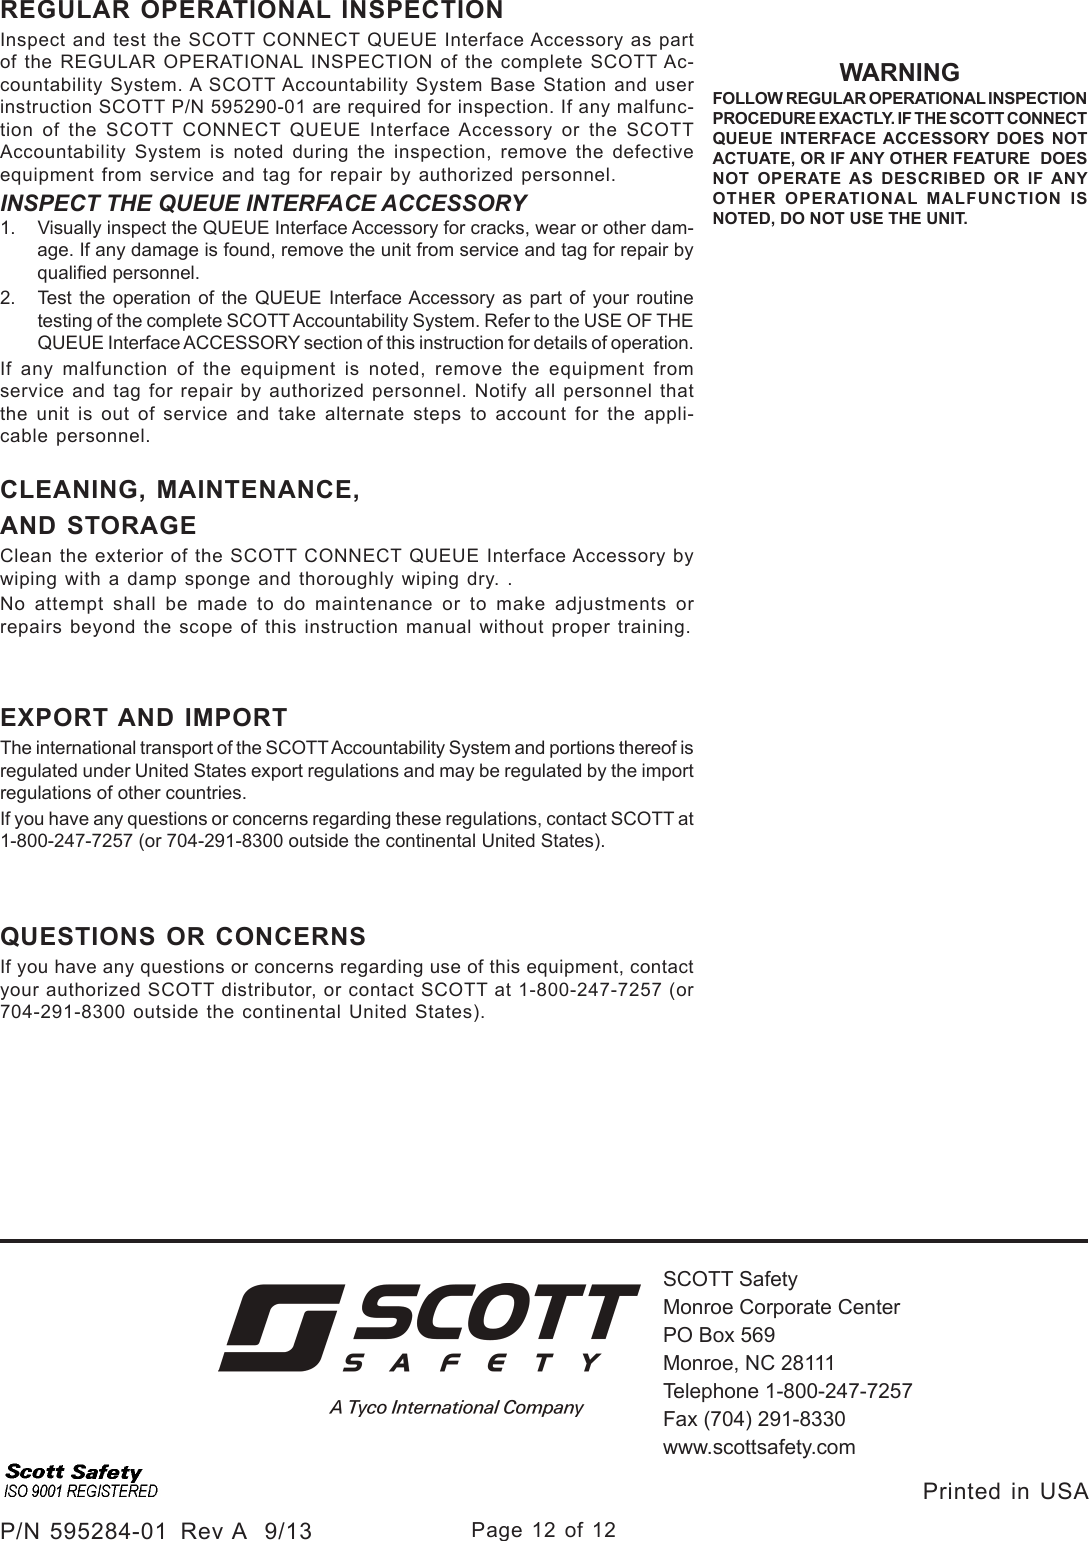 Page 12 of 12P/N 595284-01  Rev A  9/13SCOTT SafetyMonroe Corporate CenterPO Box 569Monroe, NC 28111Telephone 1-800-247-7257Fax (704) 291-8330www.scottsafety.com Printed in USA REGULAR OPERATIONAL INSPECTIONInspect and test the SCOTT CONNECT QUEUE Interface Accessory as part of the REGULAR OPERATIONAL INSPECTION of the complete SCOTT Ac-countability System. A SCOTT Accountability System Base Station and user instruction SCOTT P/N 595290-01 are required for inspection. If any malfunc-tion of the SCOTT CONNECT QUEUE Interface Accessory or the SCOTT Accountability System is noted during the inspection, remove the defective equipment from service and tag for repair by authorized personnel.INSPECT THE QUEUE INTERFACE ACCESSORY1.  Visually inspect the QUEUE Interface Accessory for cracks, wear or other dam-age. If any damage is found, remove the unit from service and tag for repair by qualied personnel. 2.  Test the operation of the QUEUE Interface Accessory as part of your routine testing of the complete SCOTT Accountability System. Refer to the USE OF THE QUEUE Interface ACCESSORY section of this instruction for details of operation. If any malfunction of the equipment is noted, remove the equipment from service and tag for repair by authorized personnel. Notify all personnel that the unit is out of service and take alternate steps to account for the appli-cable personnel.CLEANING, MAINTENANCE,AND STORAGE Clean the exterior of the SCOTT CONNECT QUEUE Interface Accessory by wiping with a damp sponge and thoroughly wiping dry. .No attempt shall be made to do maintenance or to make adjustments or repairs beyond the scope of this instruction manual without proper training.WARNINGFOLLOW REGULAR OPERATIONAL INSPECTION PROCEDURE EXACTLY. IF THE SCOTT CONNECT QUEUE INTERFACE ACCESSORY DOES NOT ACTUATE, OR IF ANY OTHER FEATURE  DOES NOT OPERATE AS DESCRIBED OR IF ANY OTHER OPERATIONAL MALFUNCTION IS NOTED, DO NOT USE THE UNIT.EXPORT AND IMPORTThe international transport of the SCOTT Accountability System and portions thereof is regulated under United States export regulations and may be regulated by the import regulations of other countries.If you have any questions or concerns regarding these regulations, contact SCOTT at 1-800-247-7257 (or 704-291-8300 outside the continental United States).QUESTIONS OR CONCERNSIf you have any questions or concerns regarding use of this equipment, contact your authorized SCOTT distributor, or contact SCOTT at 1-800-247-7257 (or 704-291-8300 outside the continental United  States).